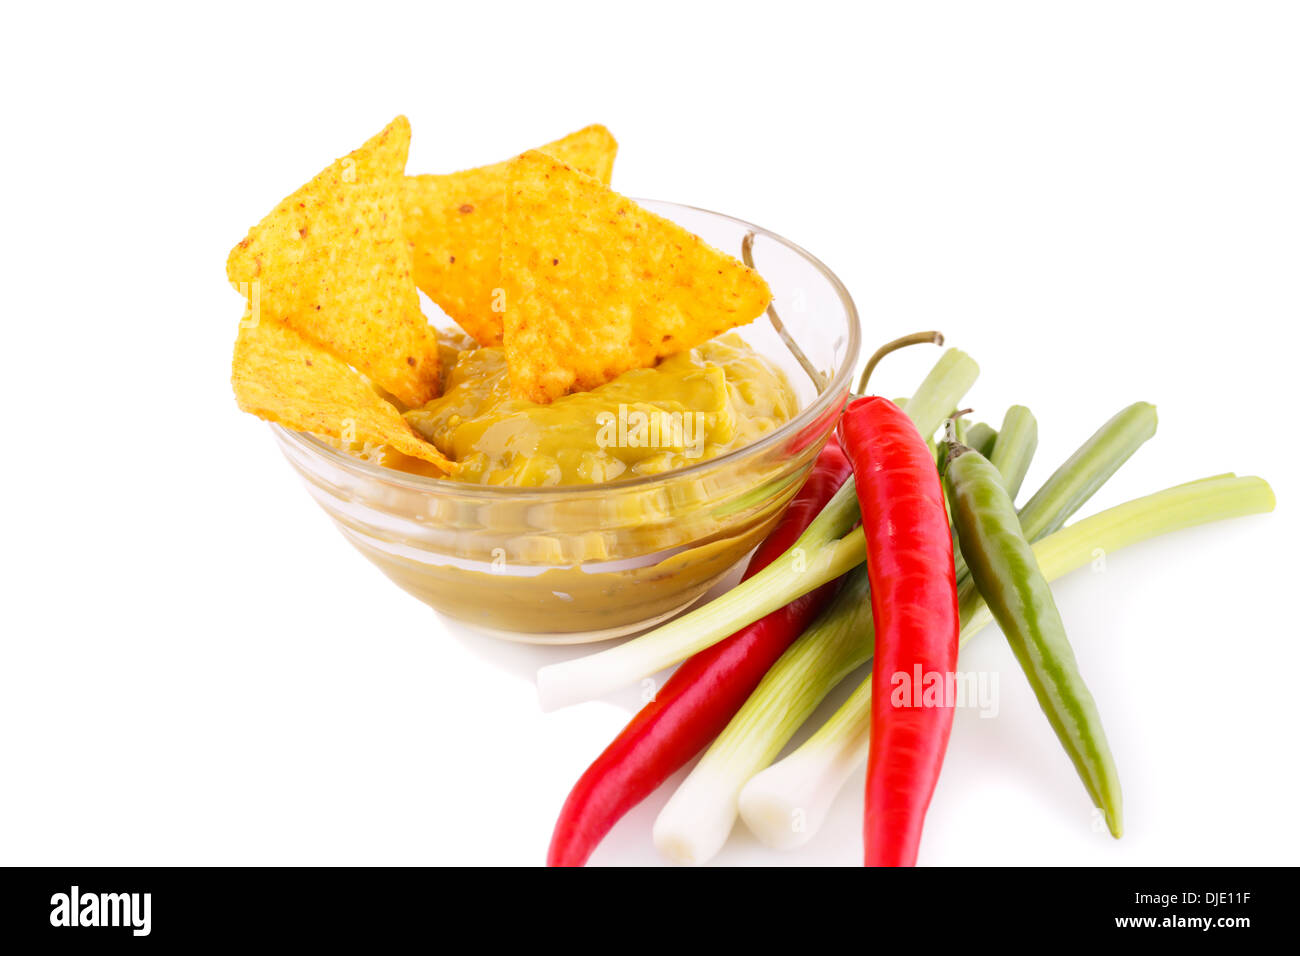 Nachos, guacamole sauce and vegetables isolated on white background. Stock Photo